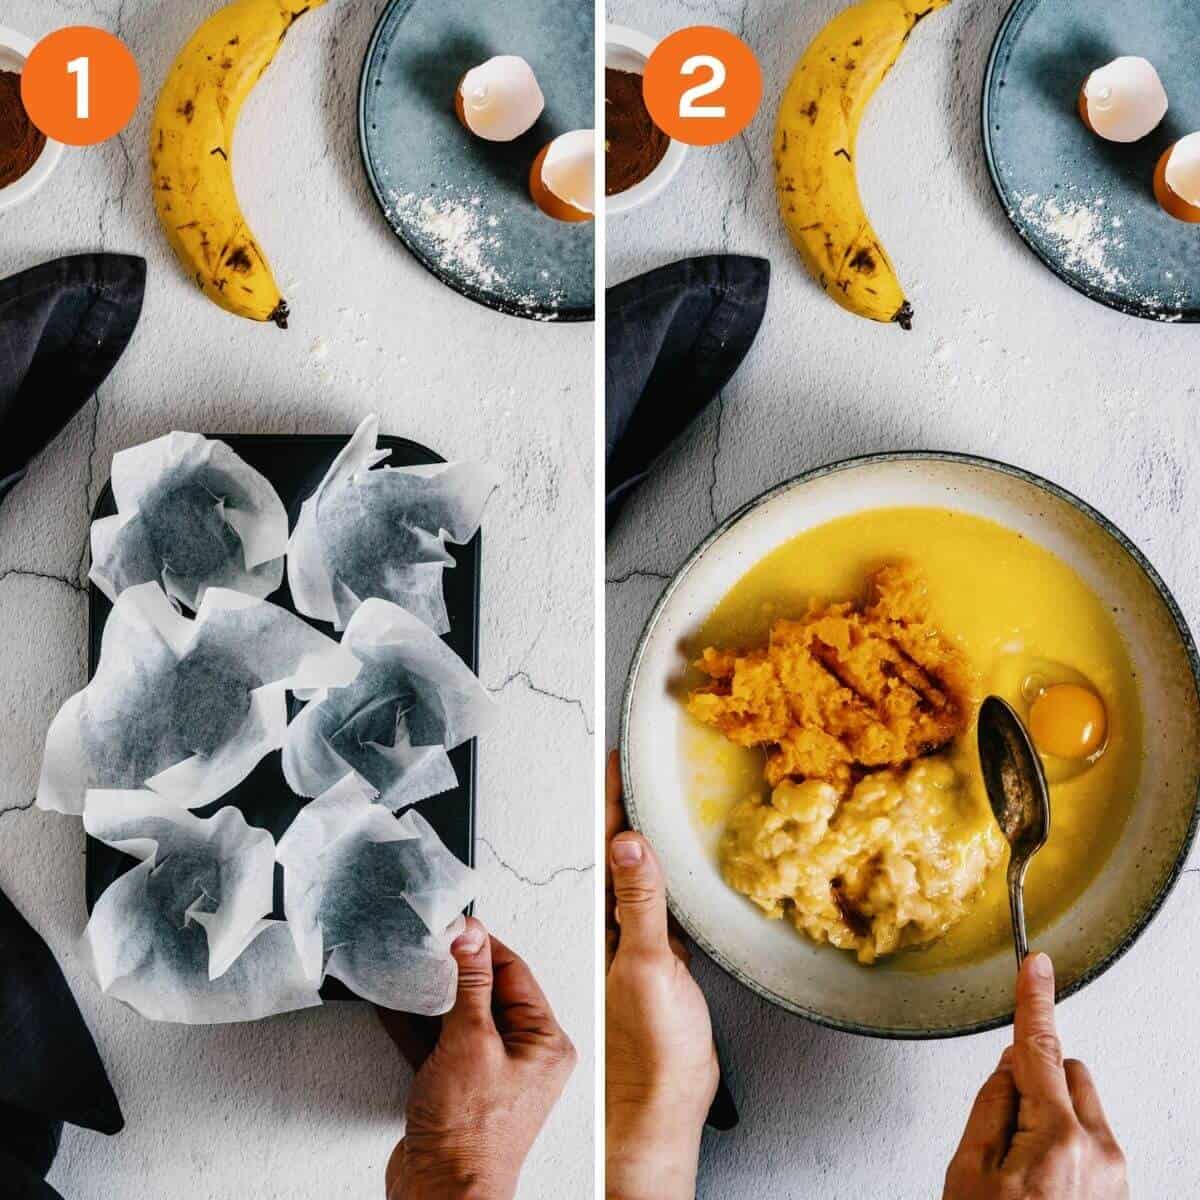 steps 1 and 2 of making pumpkin banana muffins recipe - lining muffin tin and mixing wet ingredients.